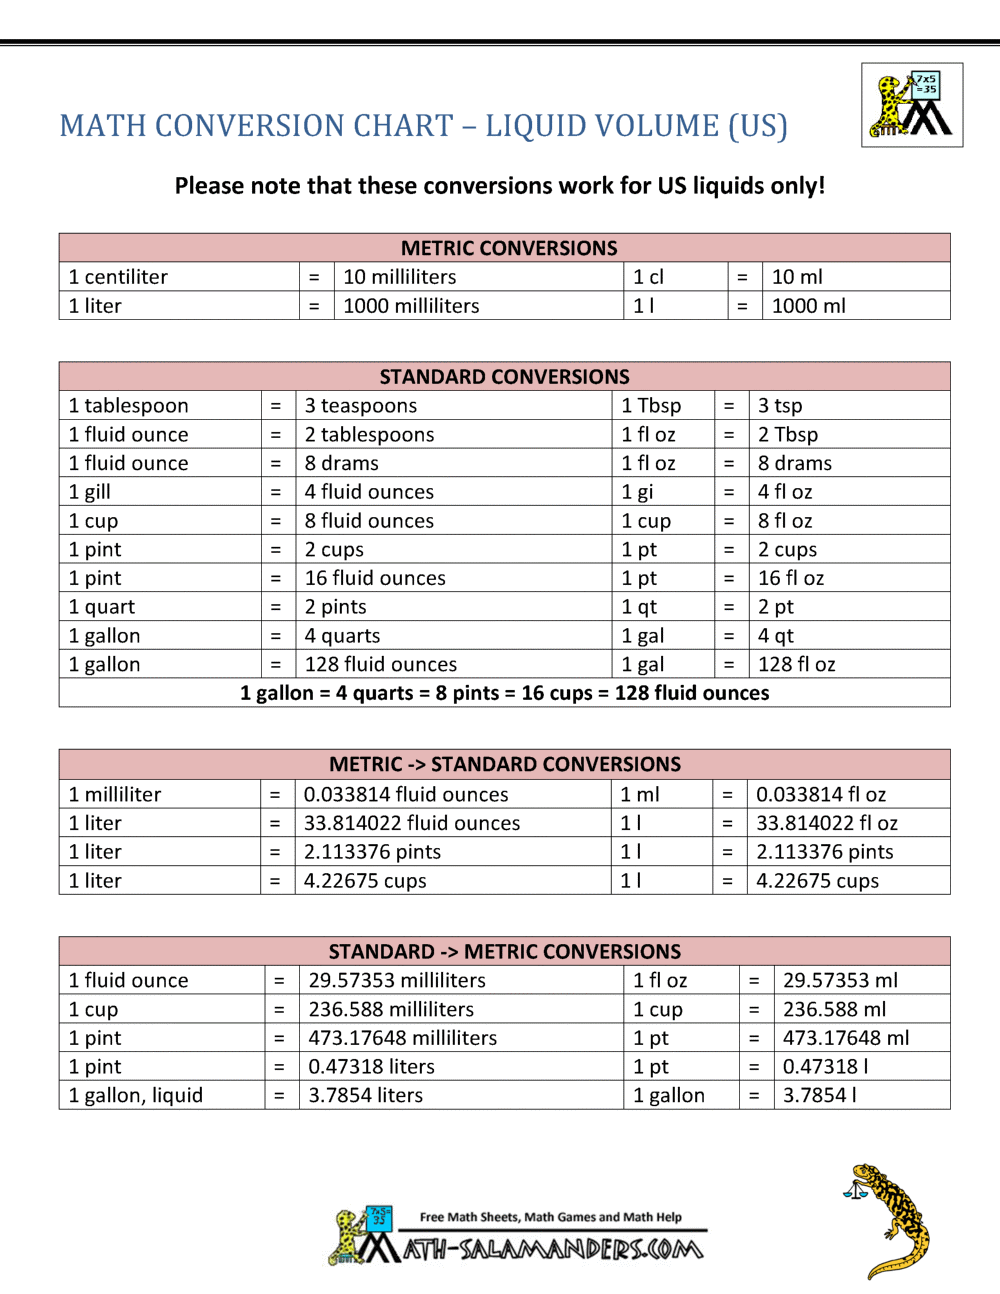 Metric to Standard Conversion Chart (US)